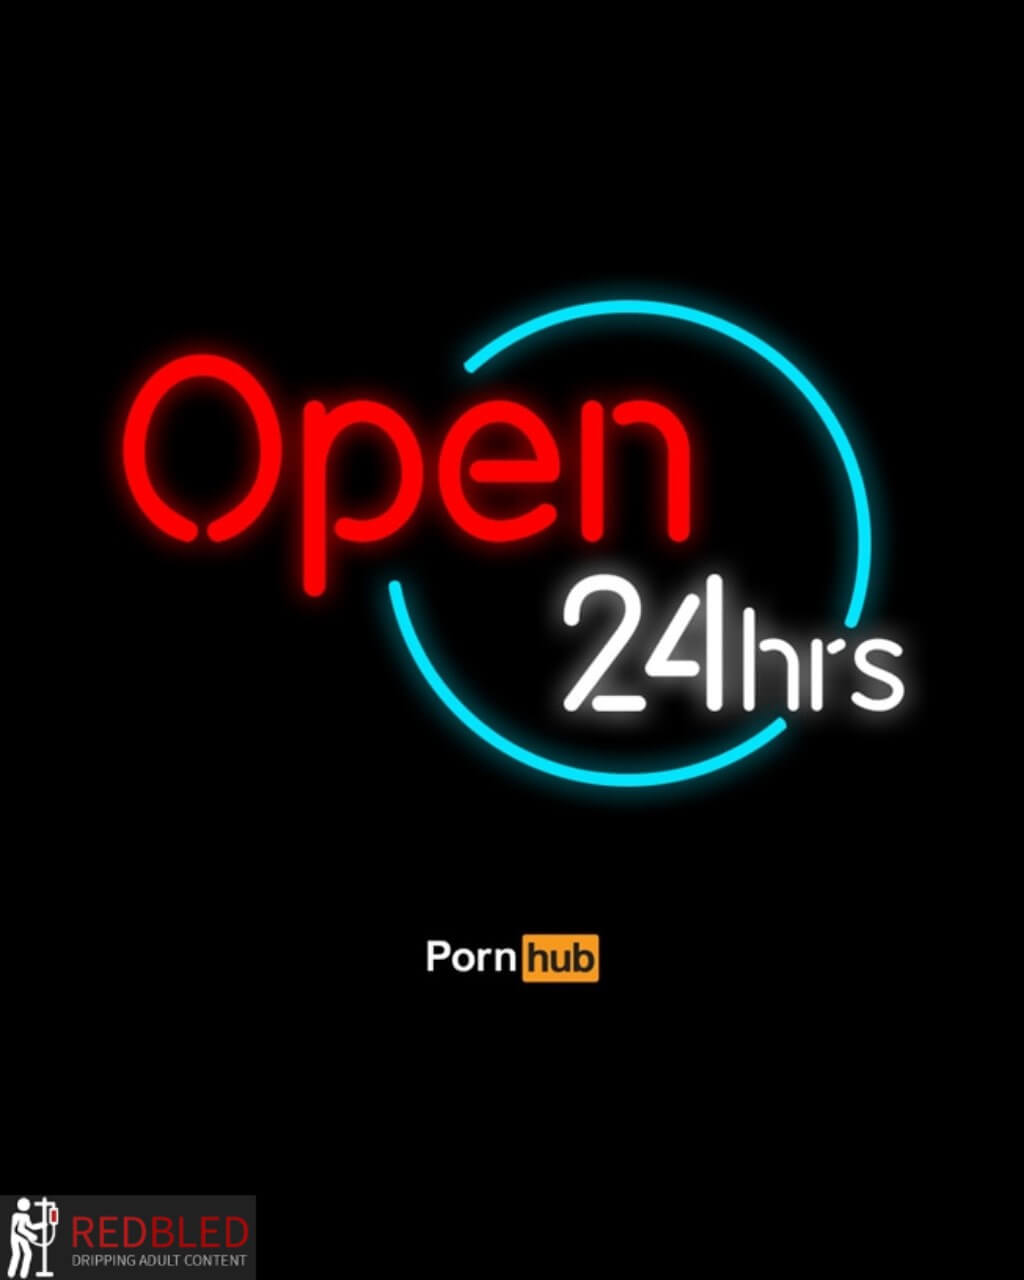 2 days access for only $1 porn ad